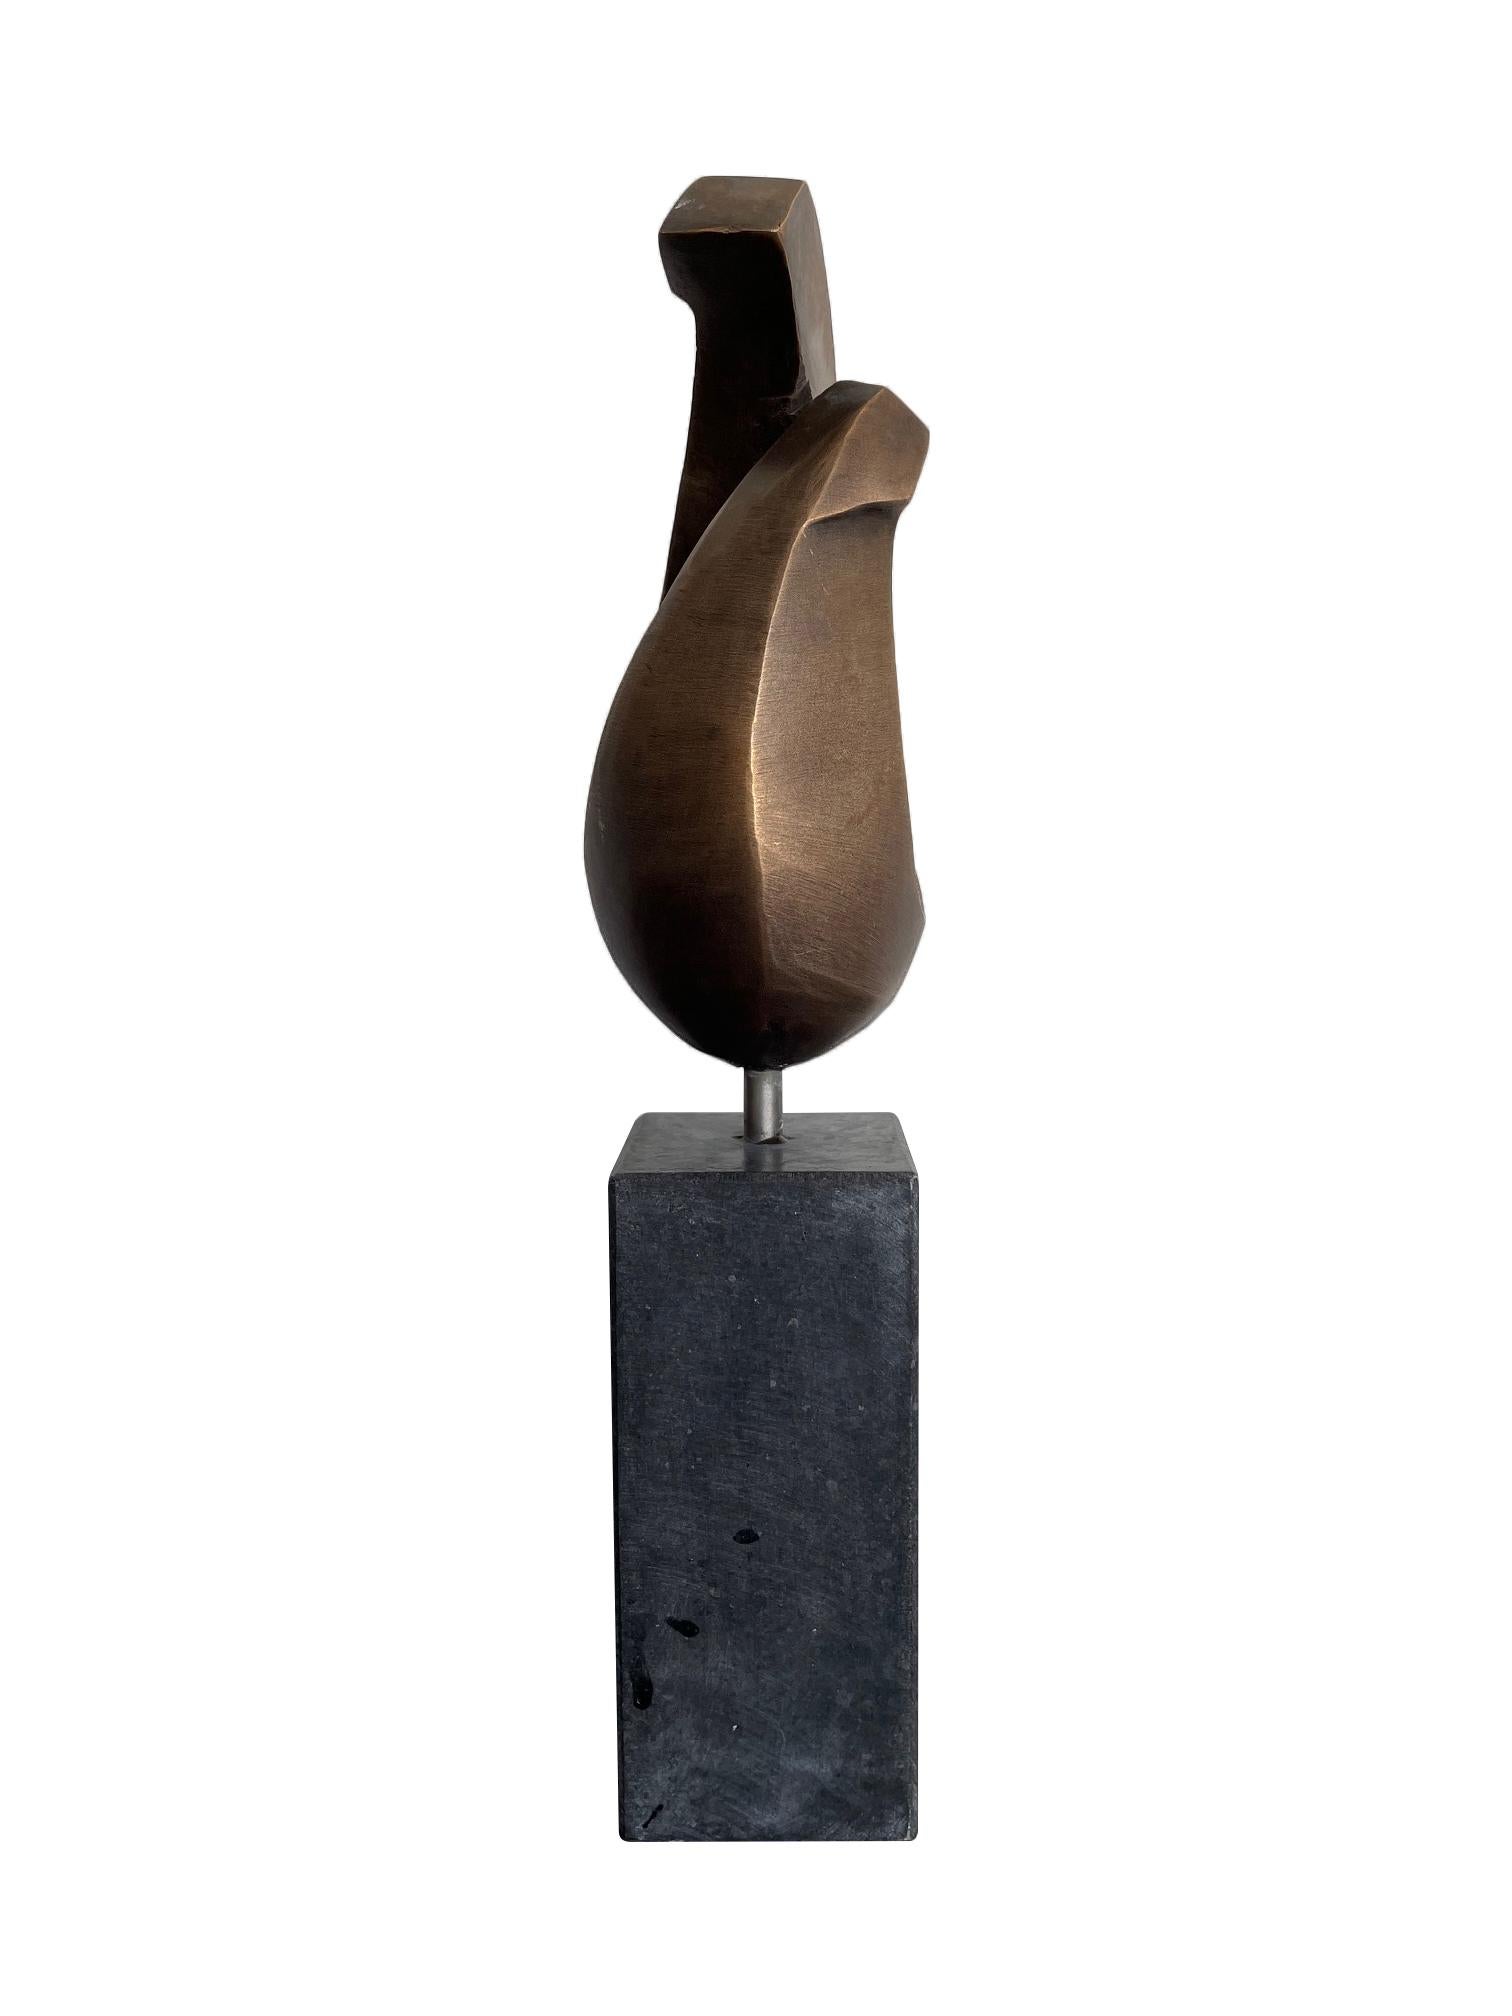 Mid-Century Modern French Midcentury Abstract Bronze Sculpture Mounted on a Black Marble Plinth